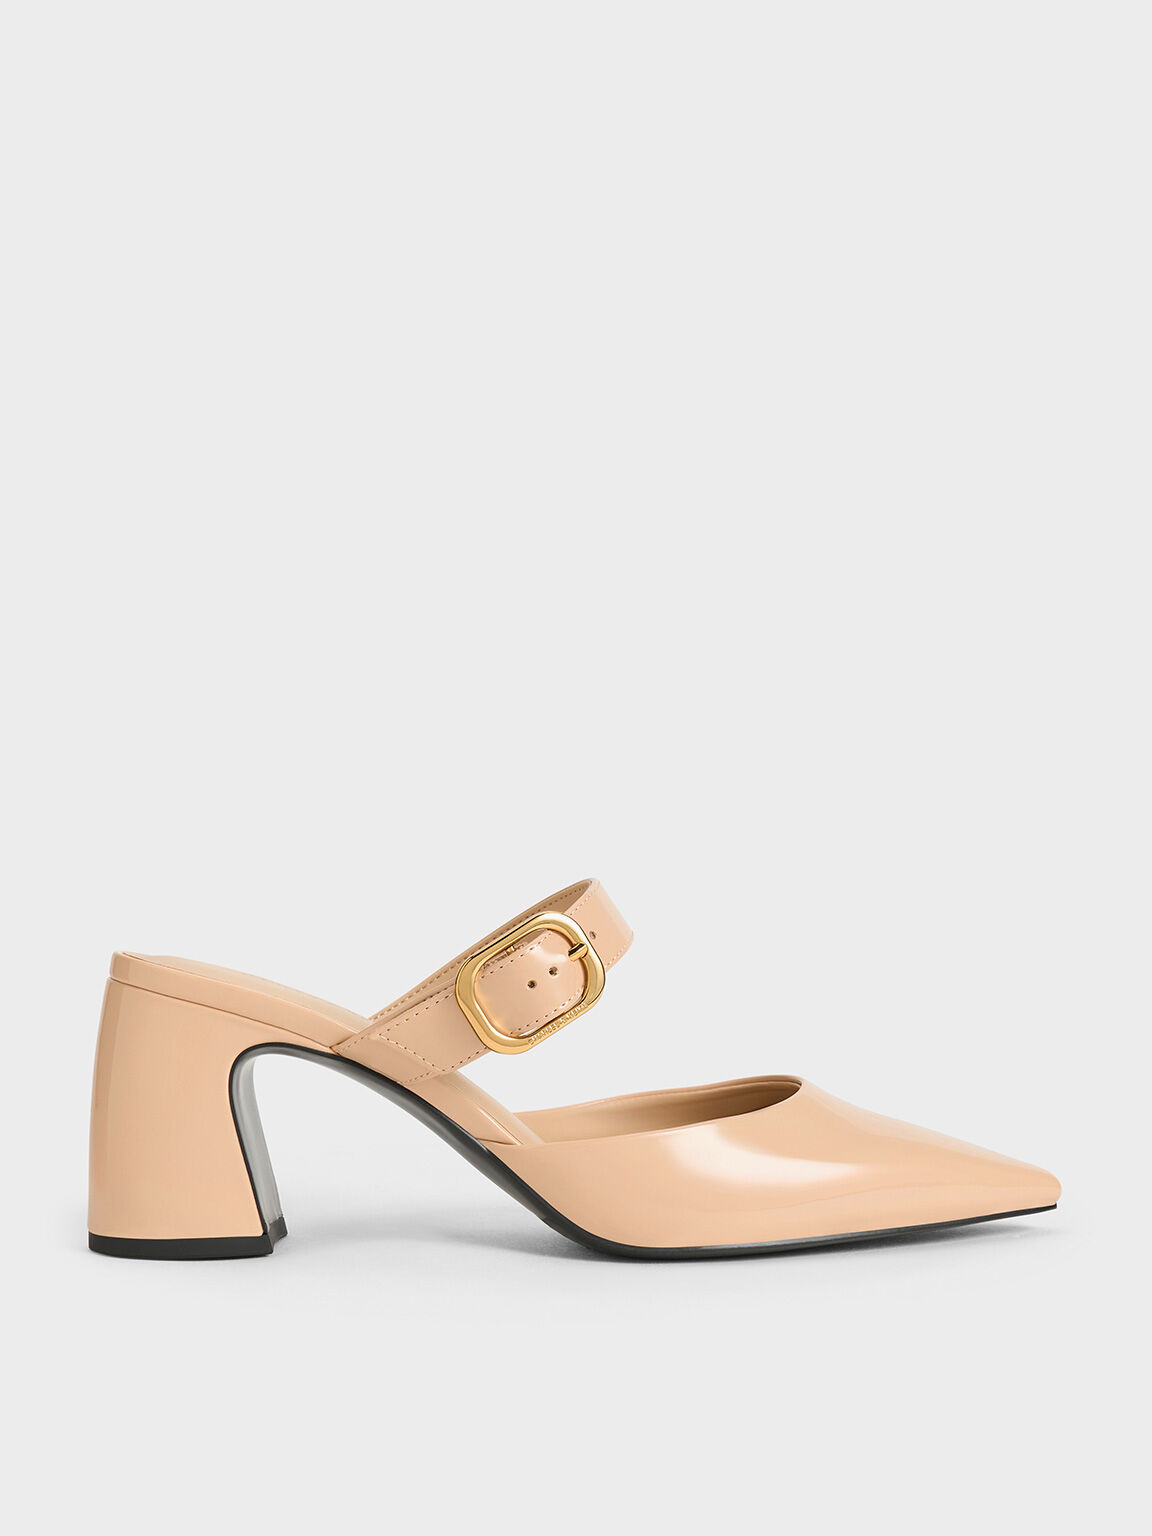 Patent Pointed-Toe Mary Jane Heeled Mules, Nude, hi-res